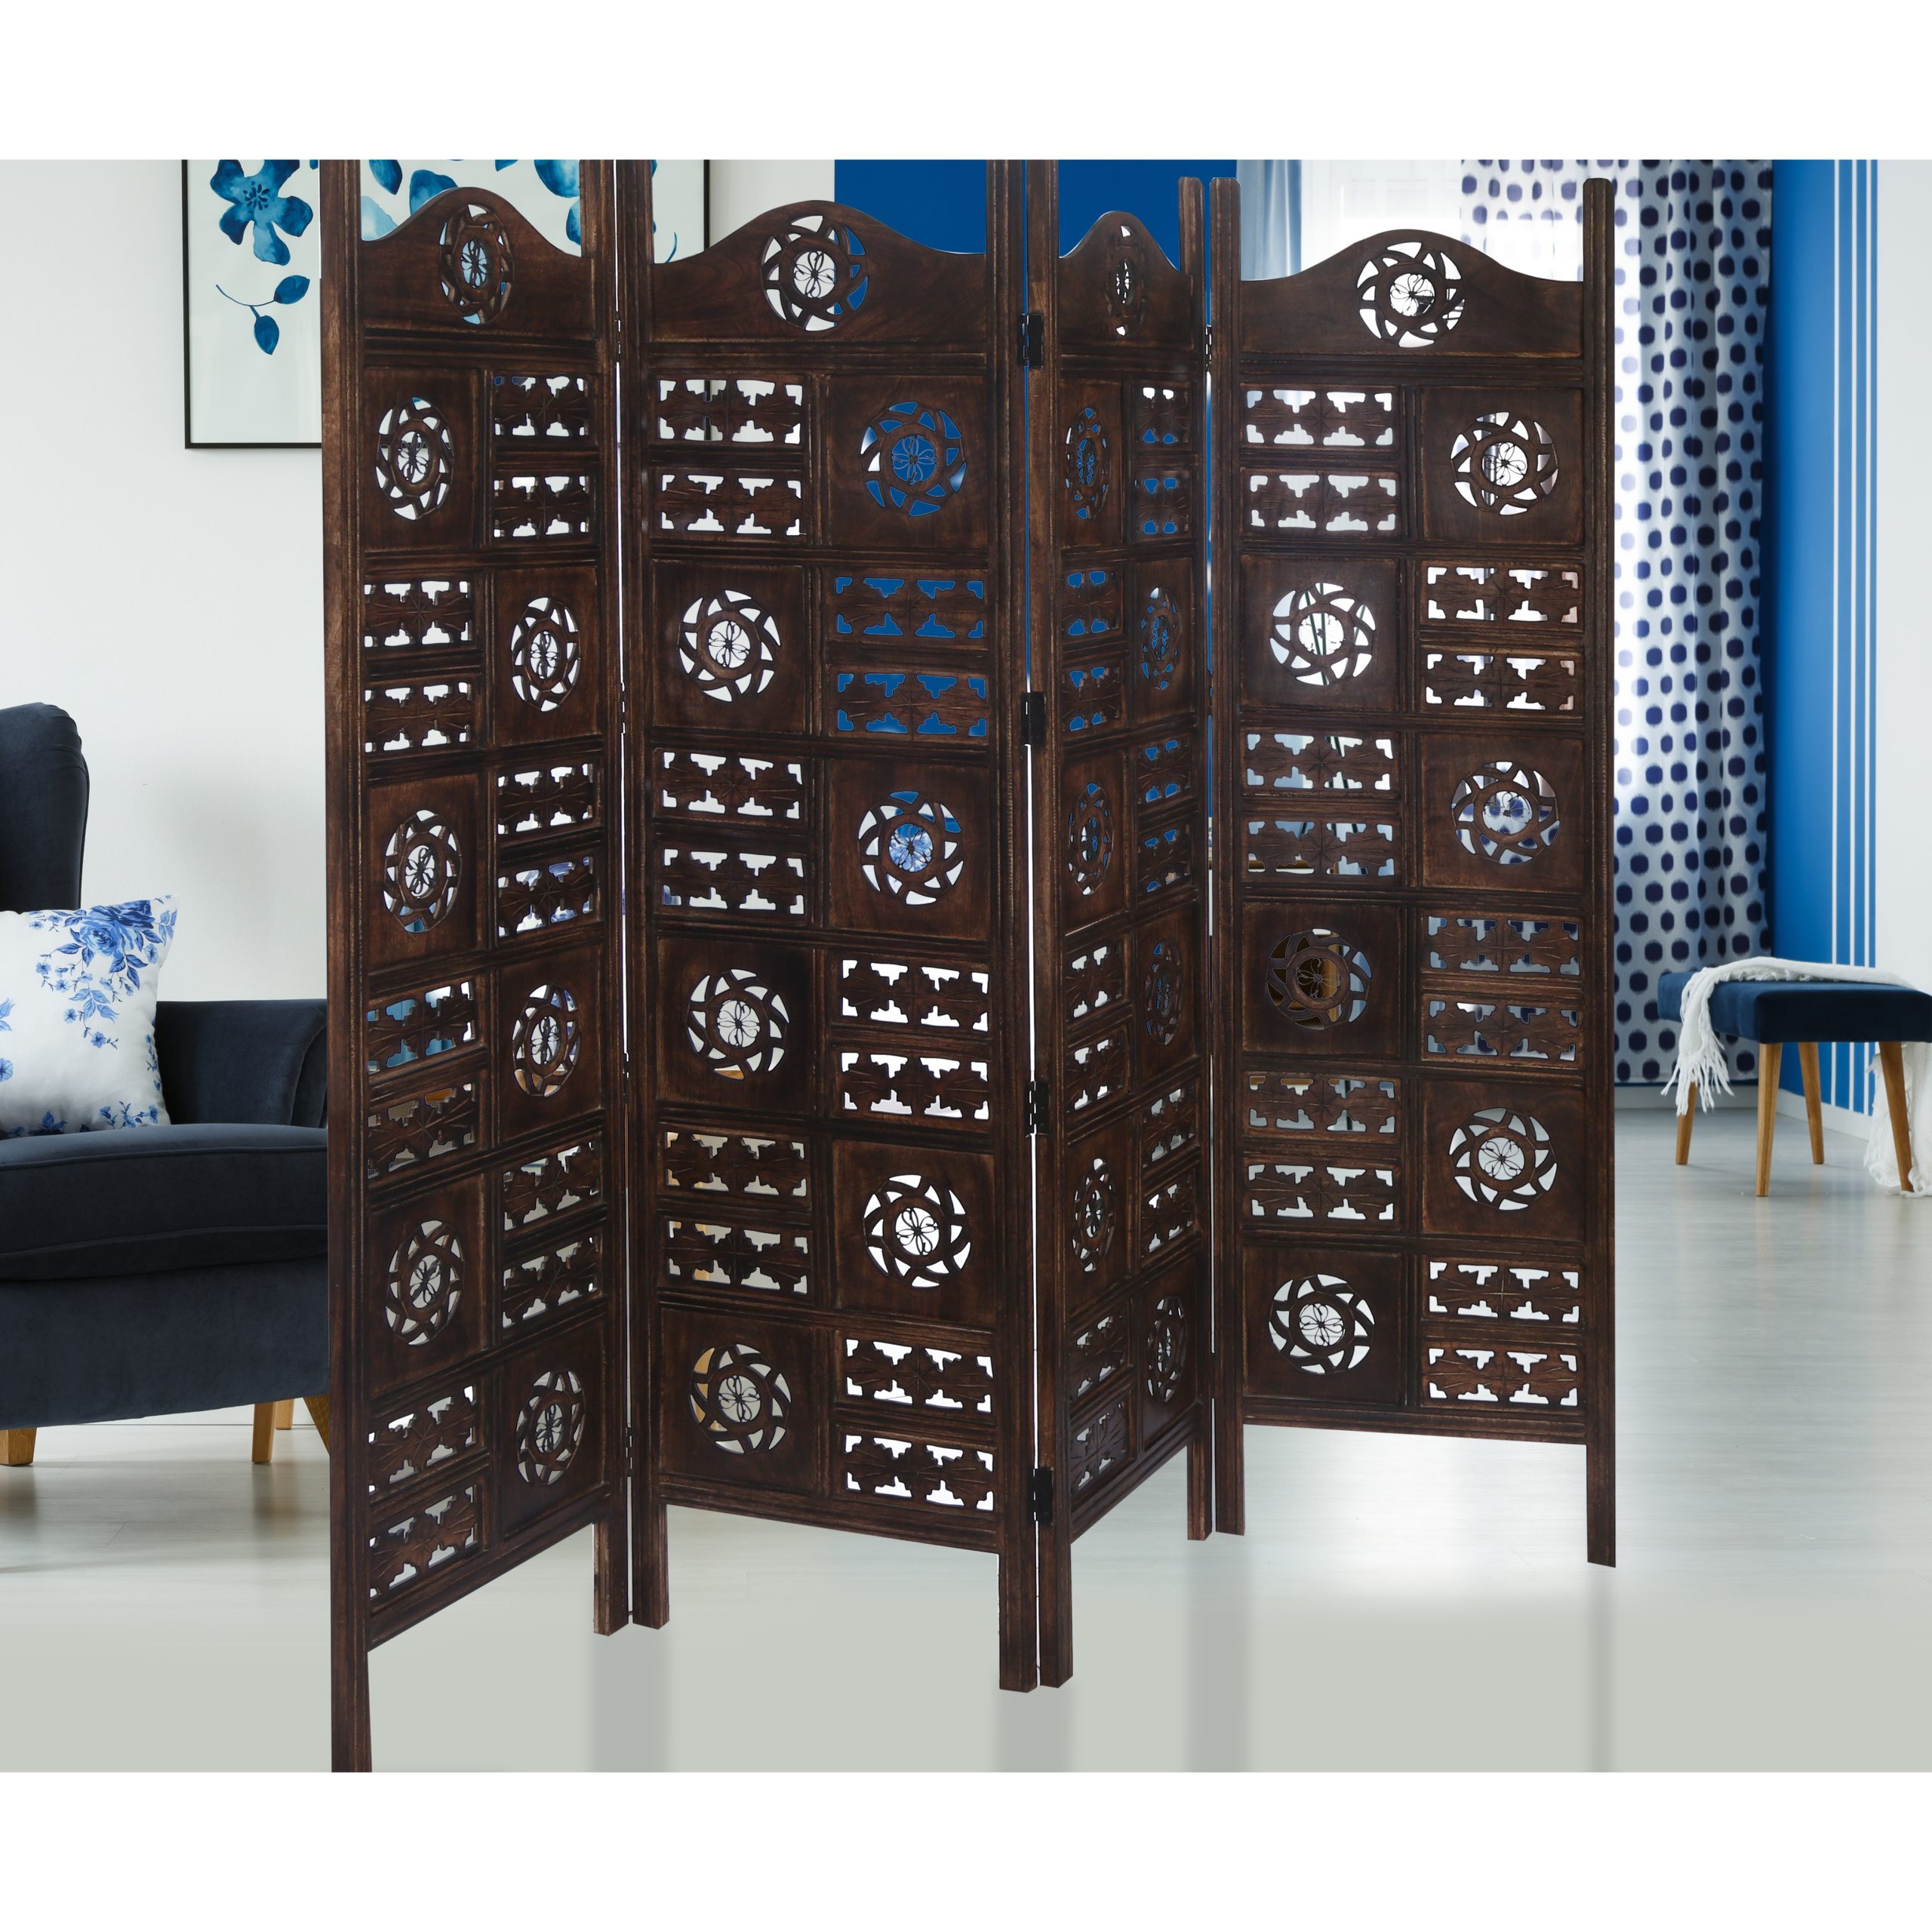 Victorville Circle Jali 4 Panel Room Divider Screen Privacy Shoji Timber Wood Stand